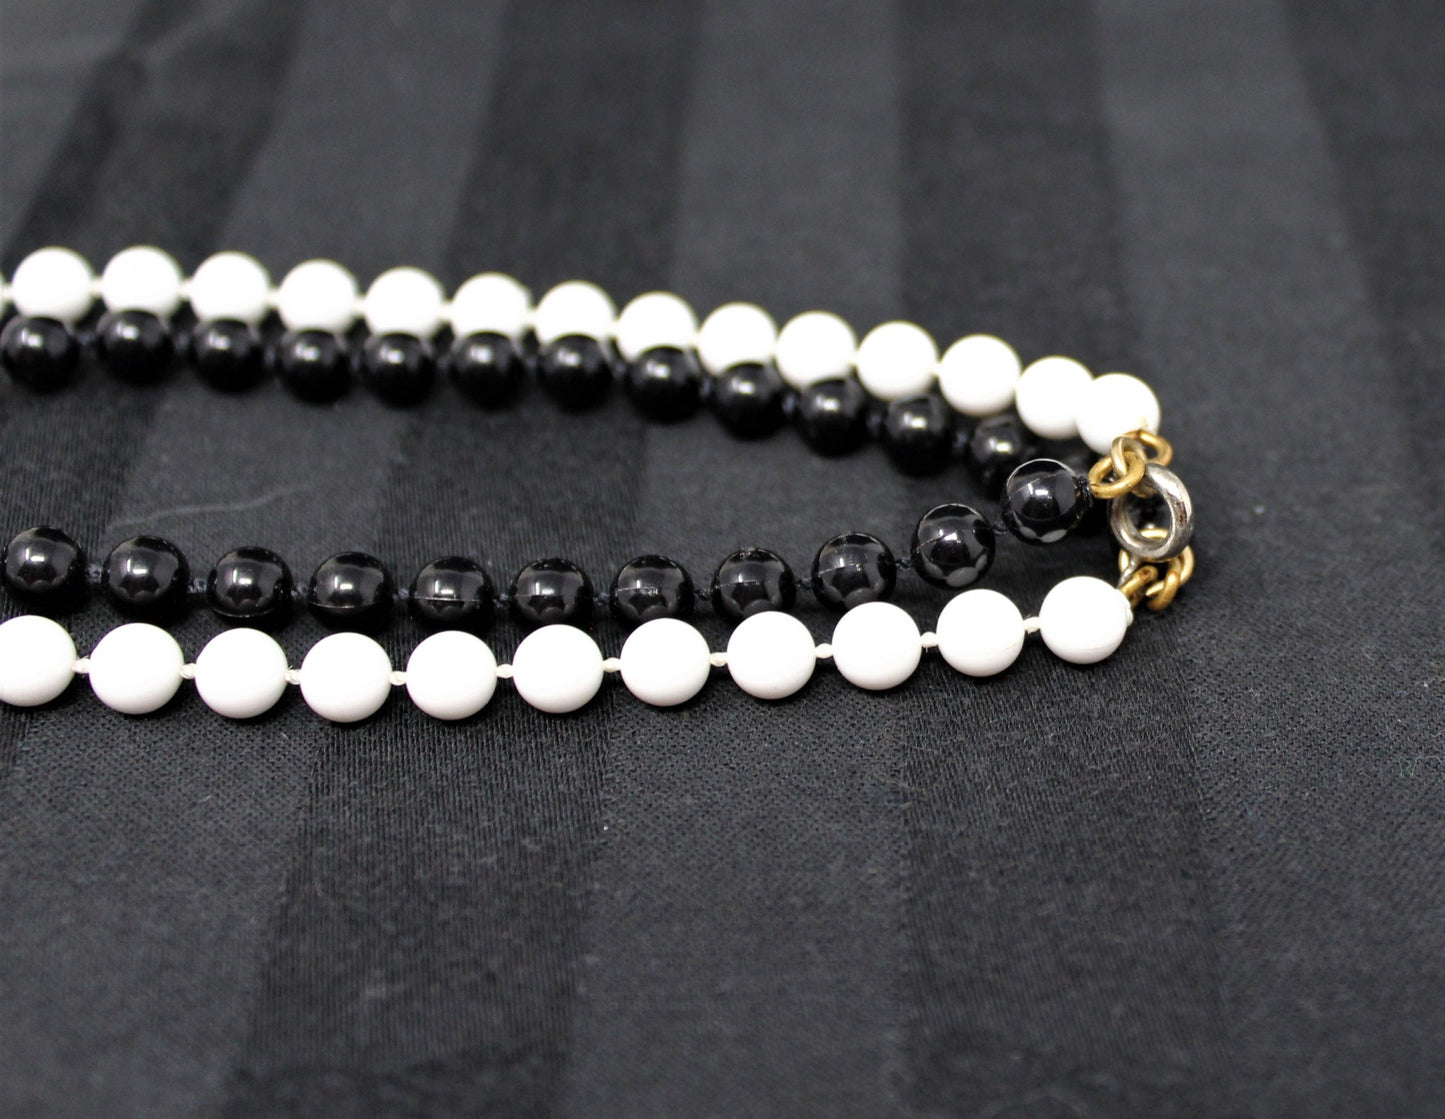 Necklace, Two Strand, Black and White Beads, 36", Retro, Vintage